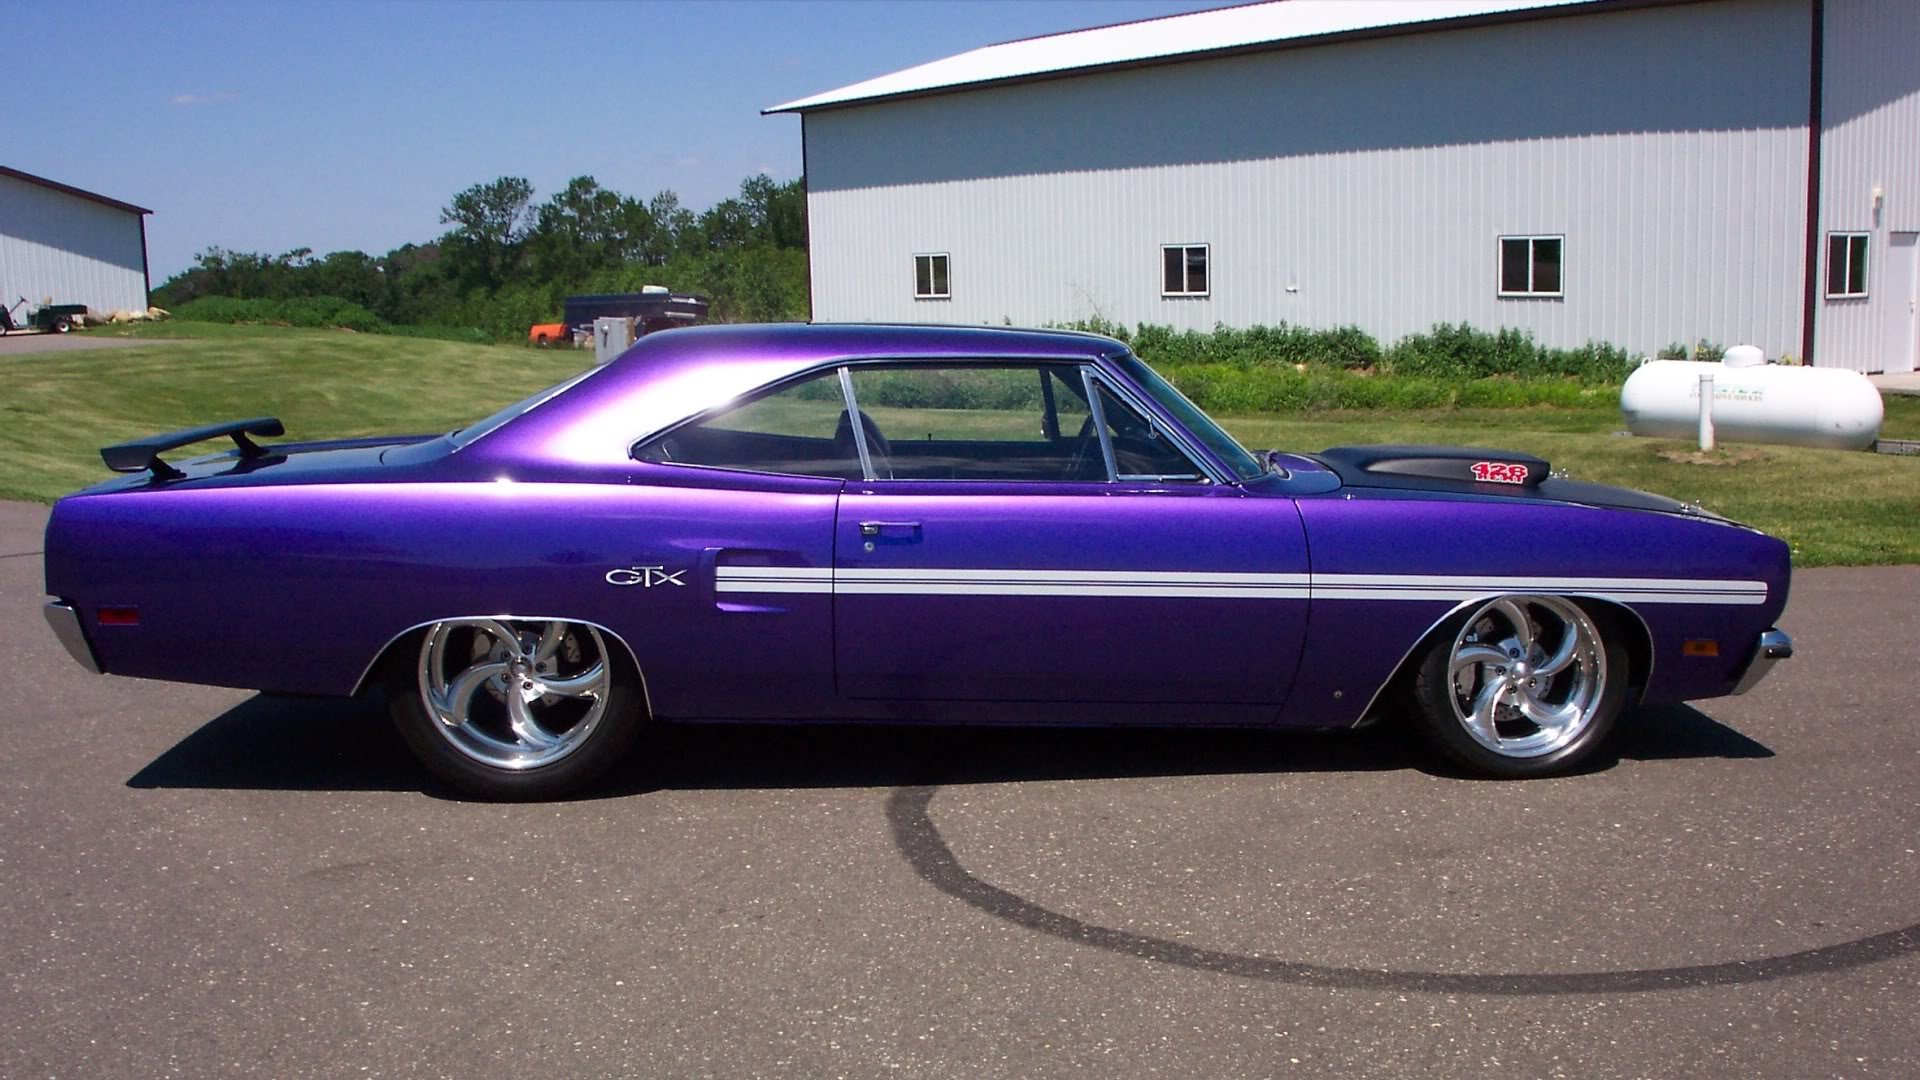 Amazing 1971 Plymouth Gtx Wallpaper Download